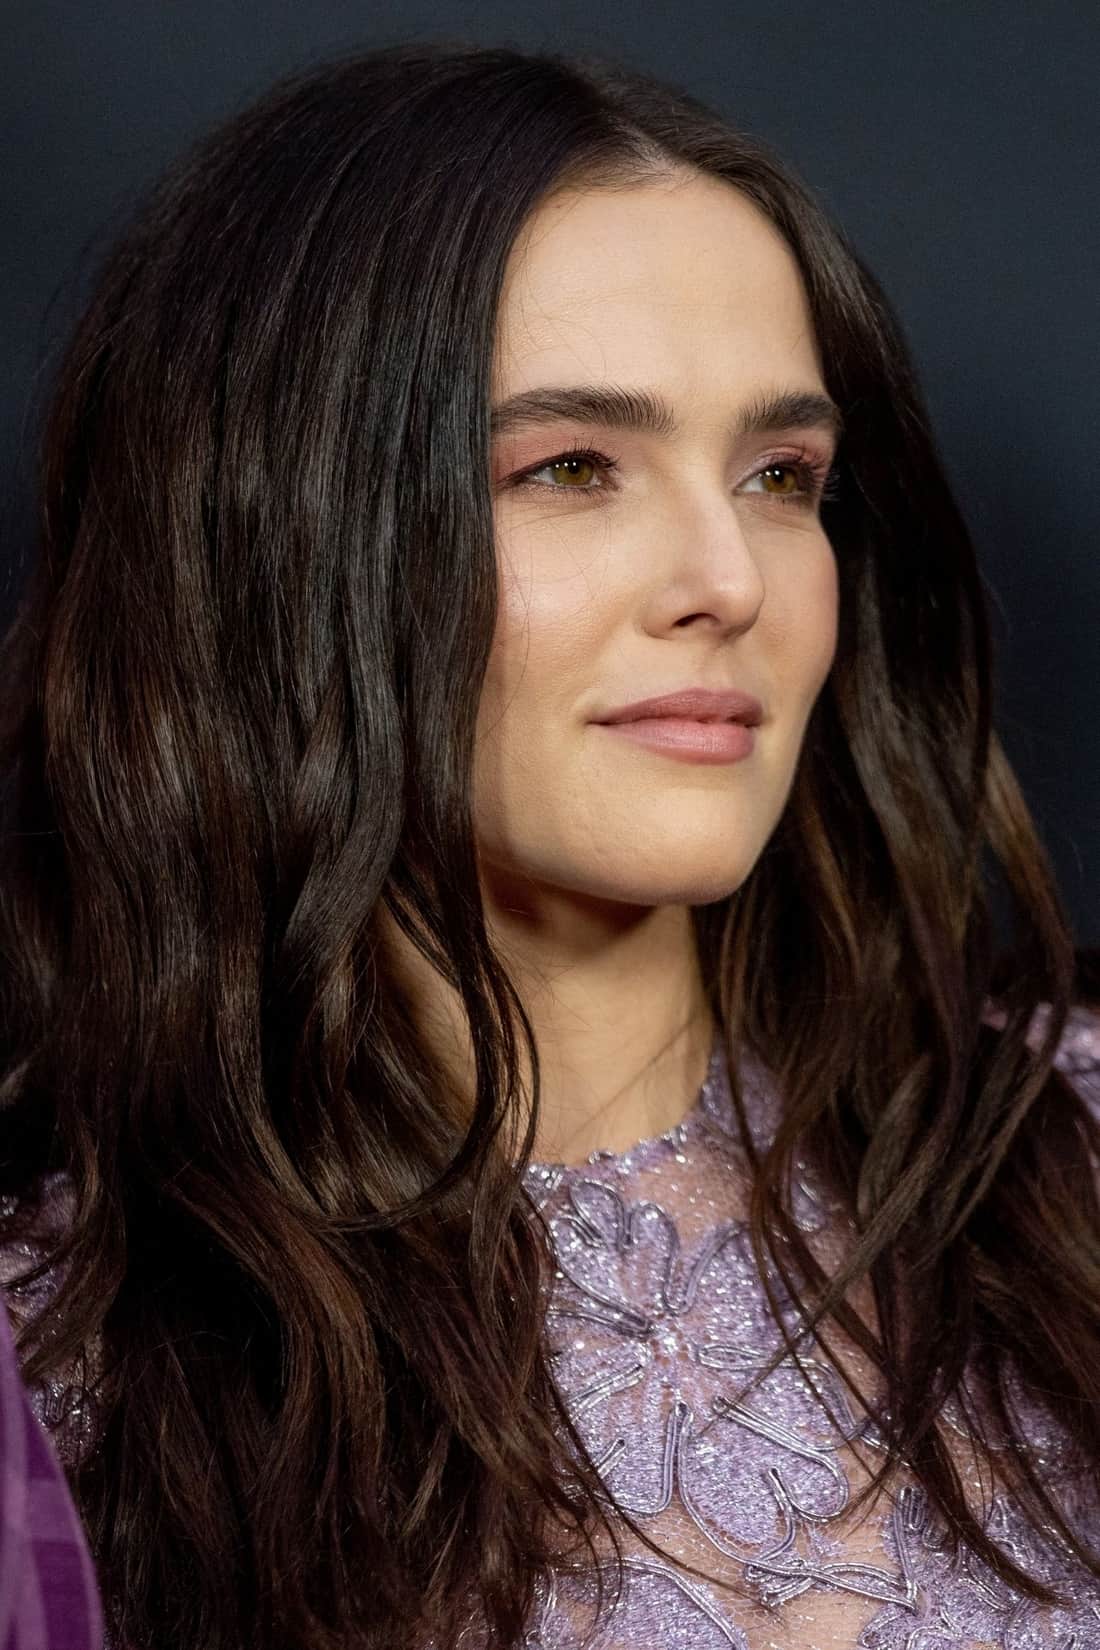 Zoey Deutch Wore a Daring Sheer Lace Dress at the Screening of "The Outfit"